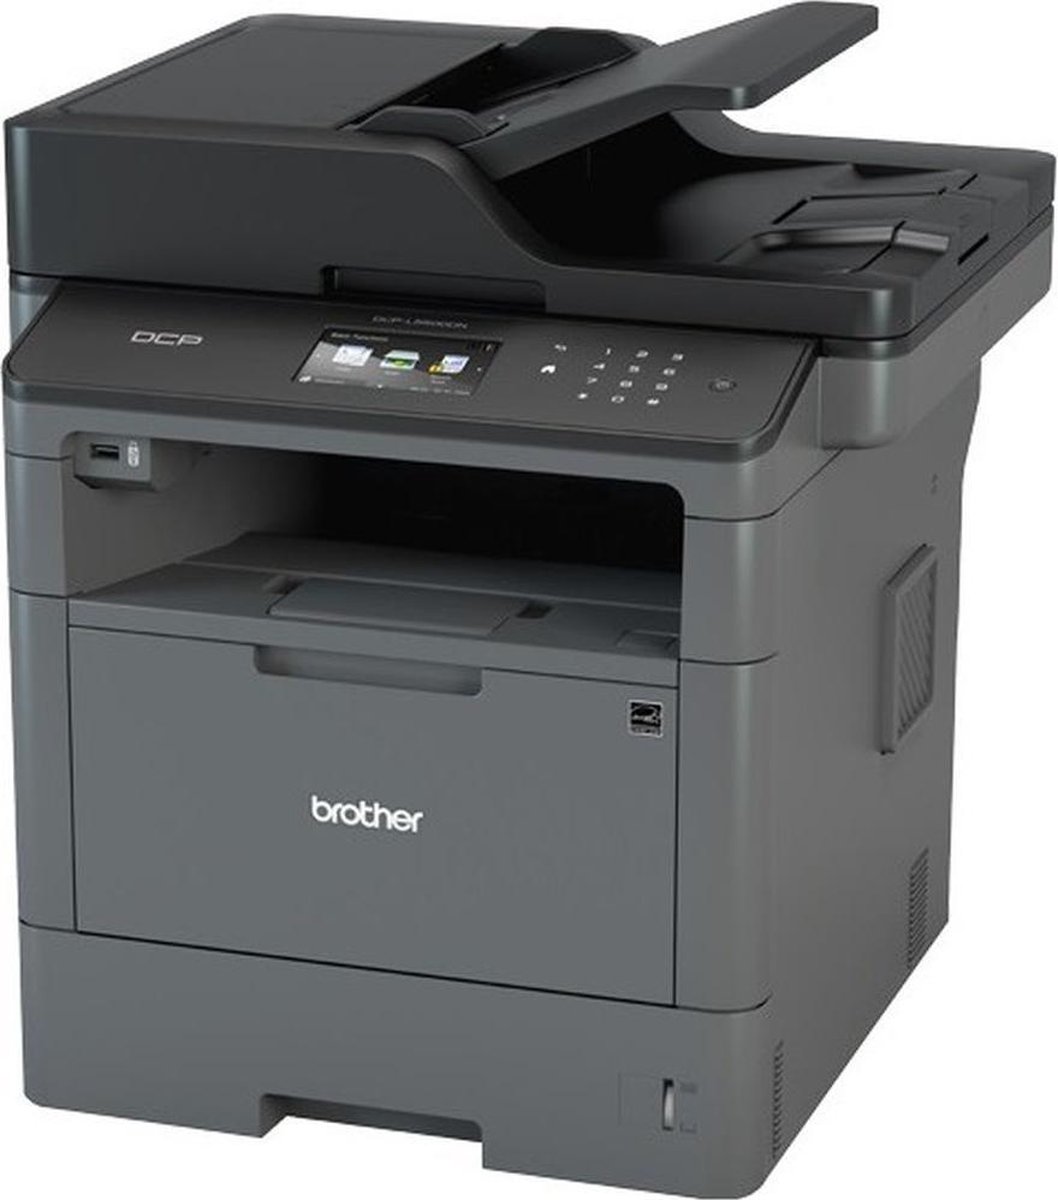 Brother all-in-one printer DCP-L5500DN